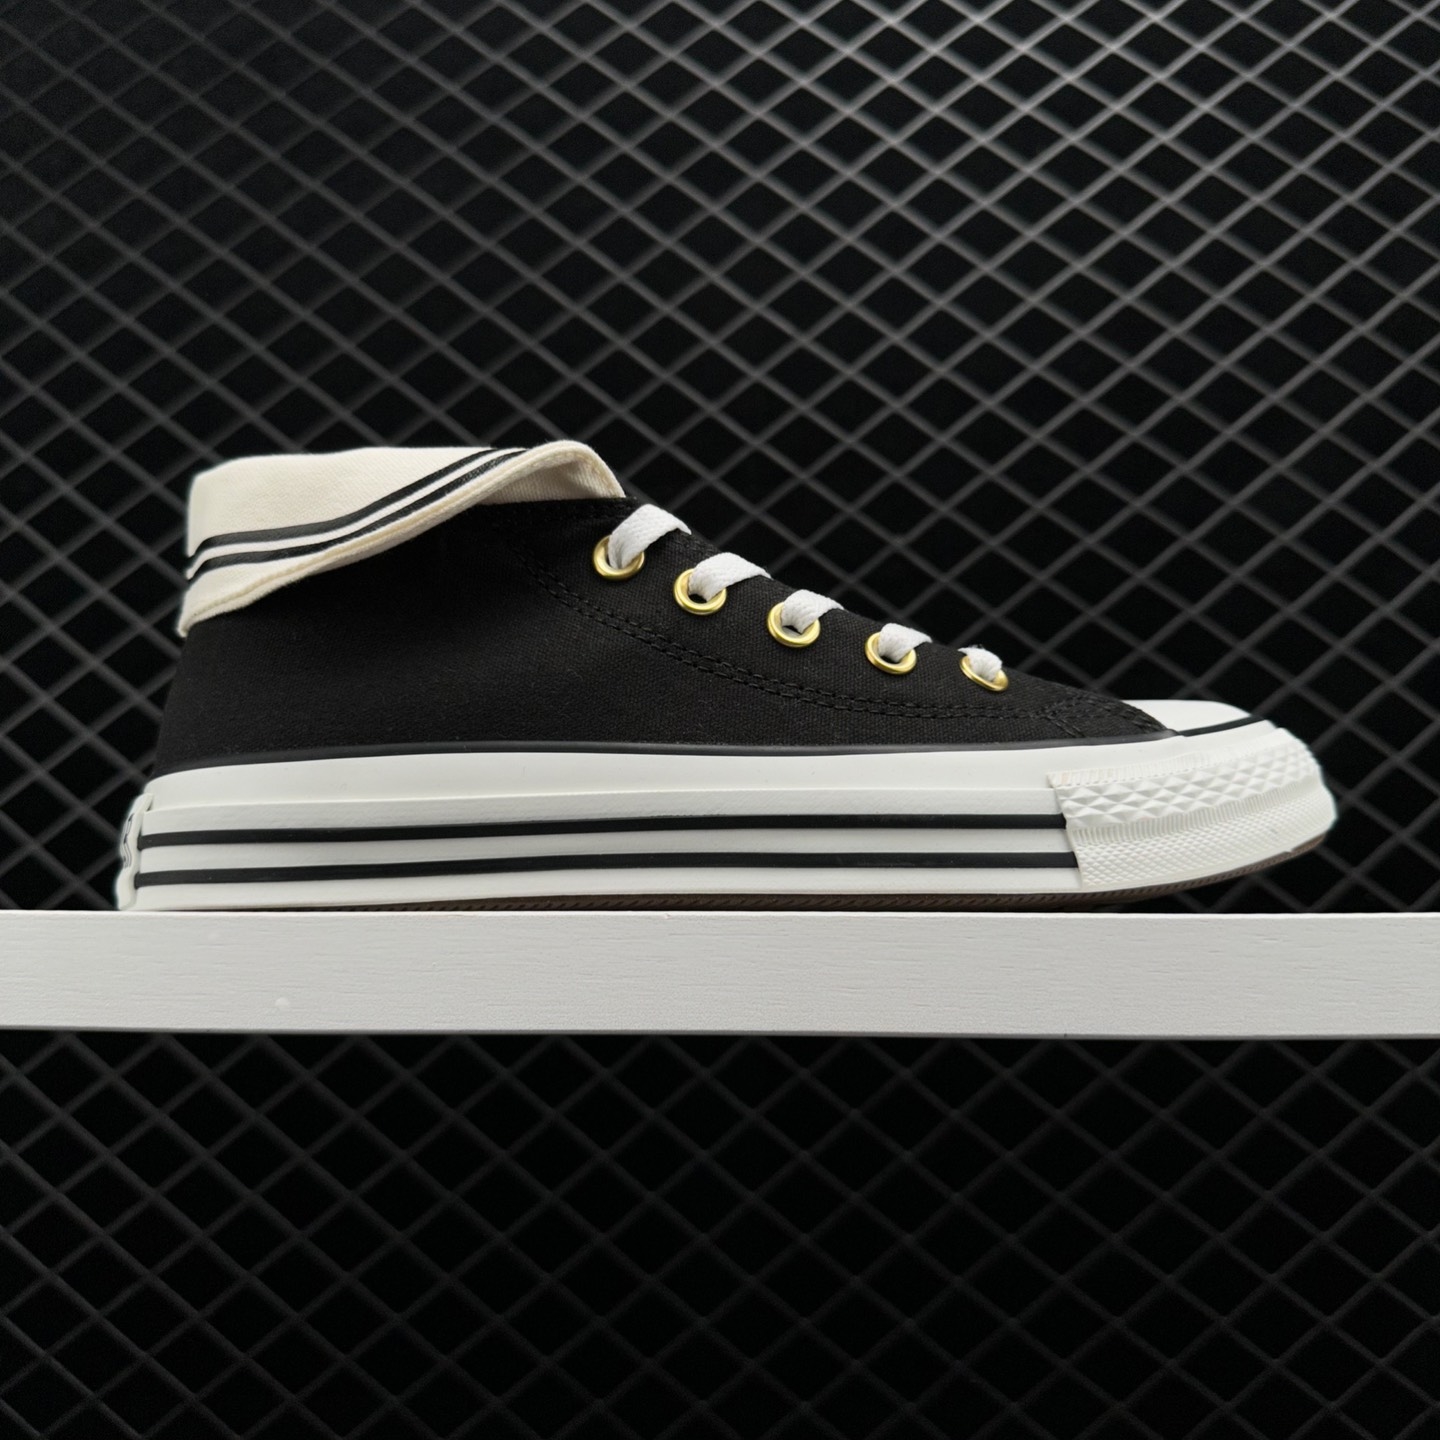 Converse All Star Sw Ox Sailor Suit Mid Canvas Shoes Black - Classic Style for Effortless Chic!